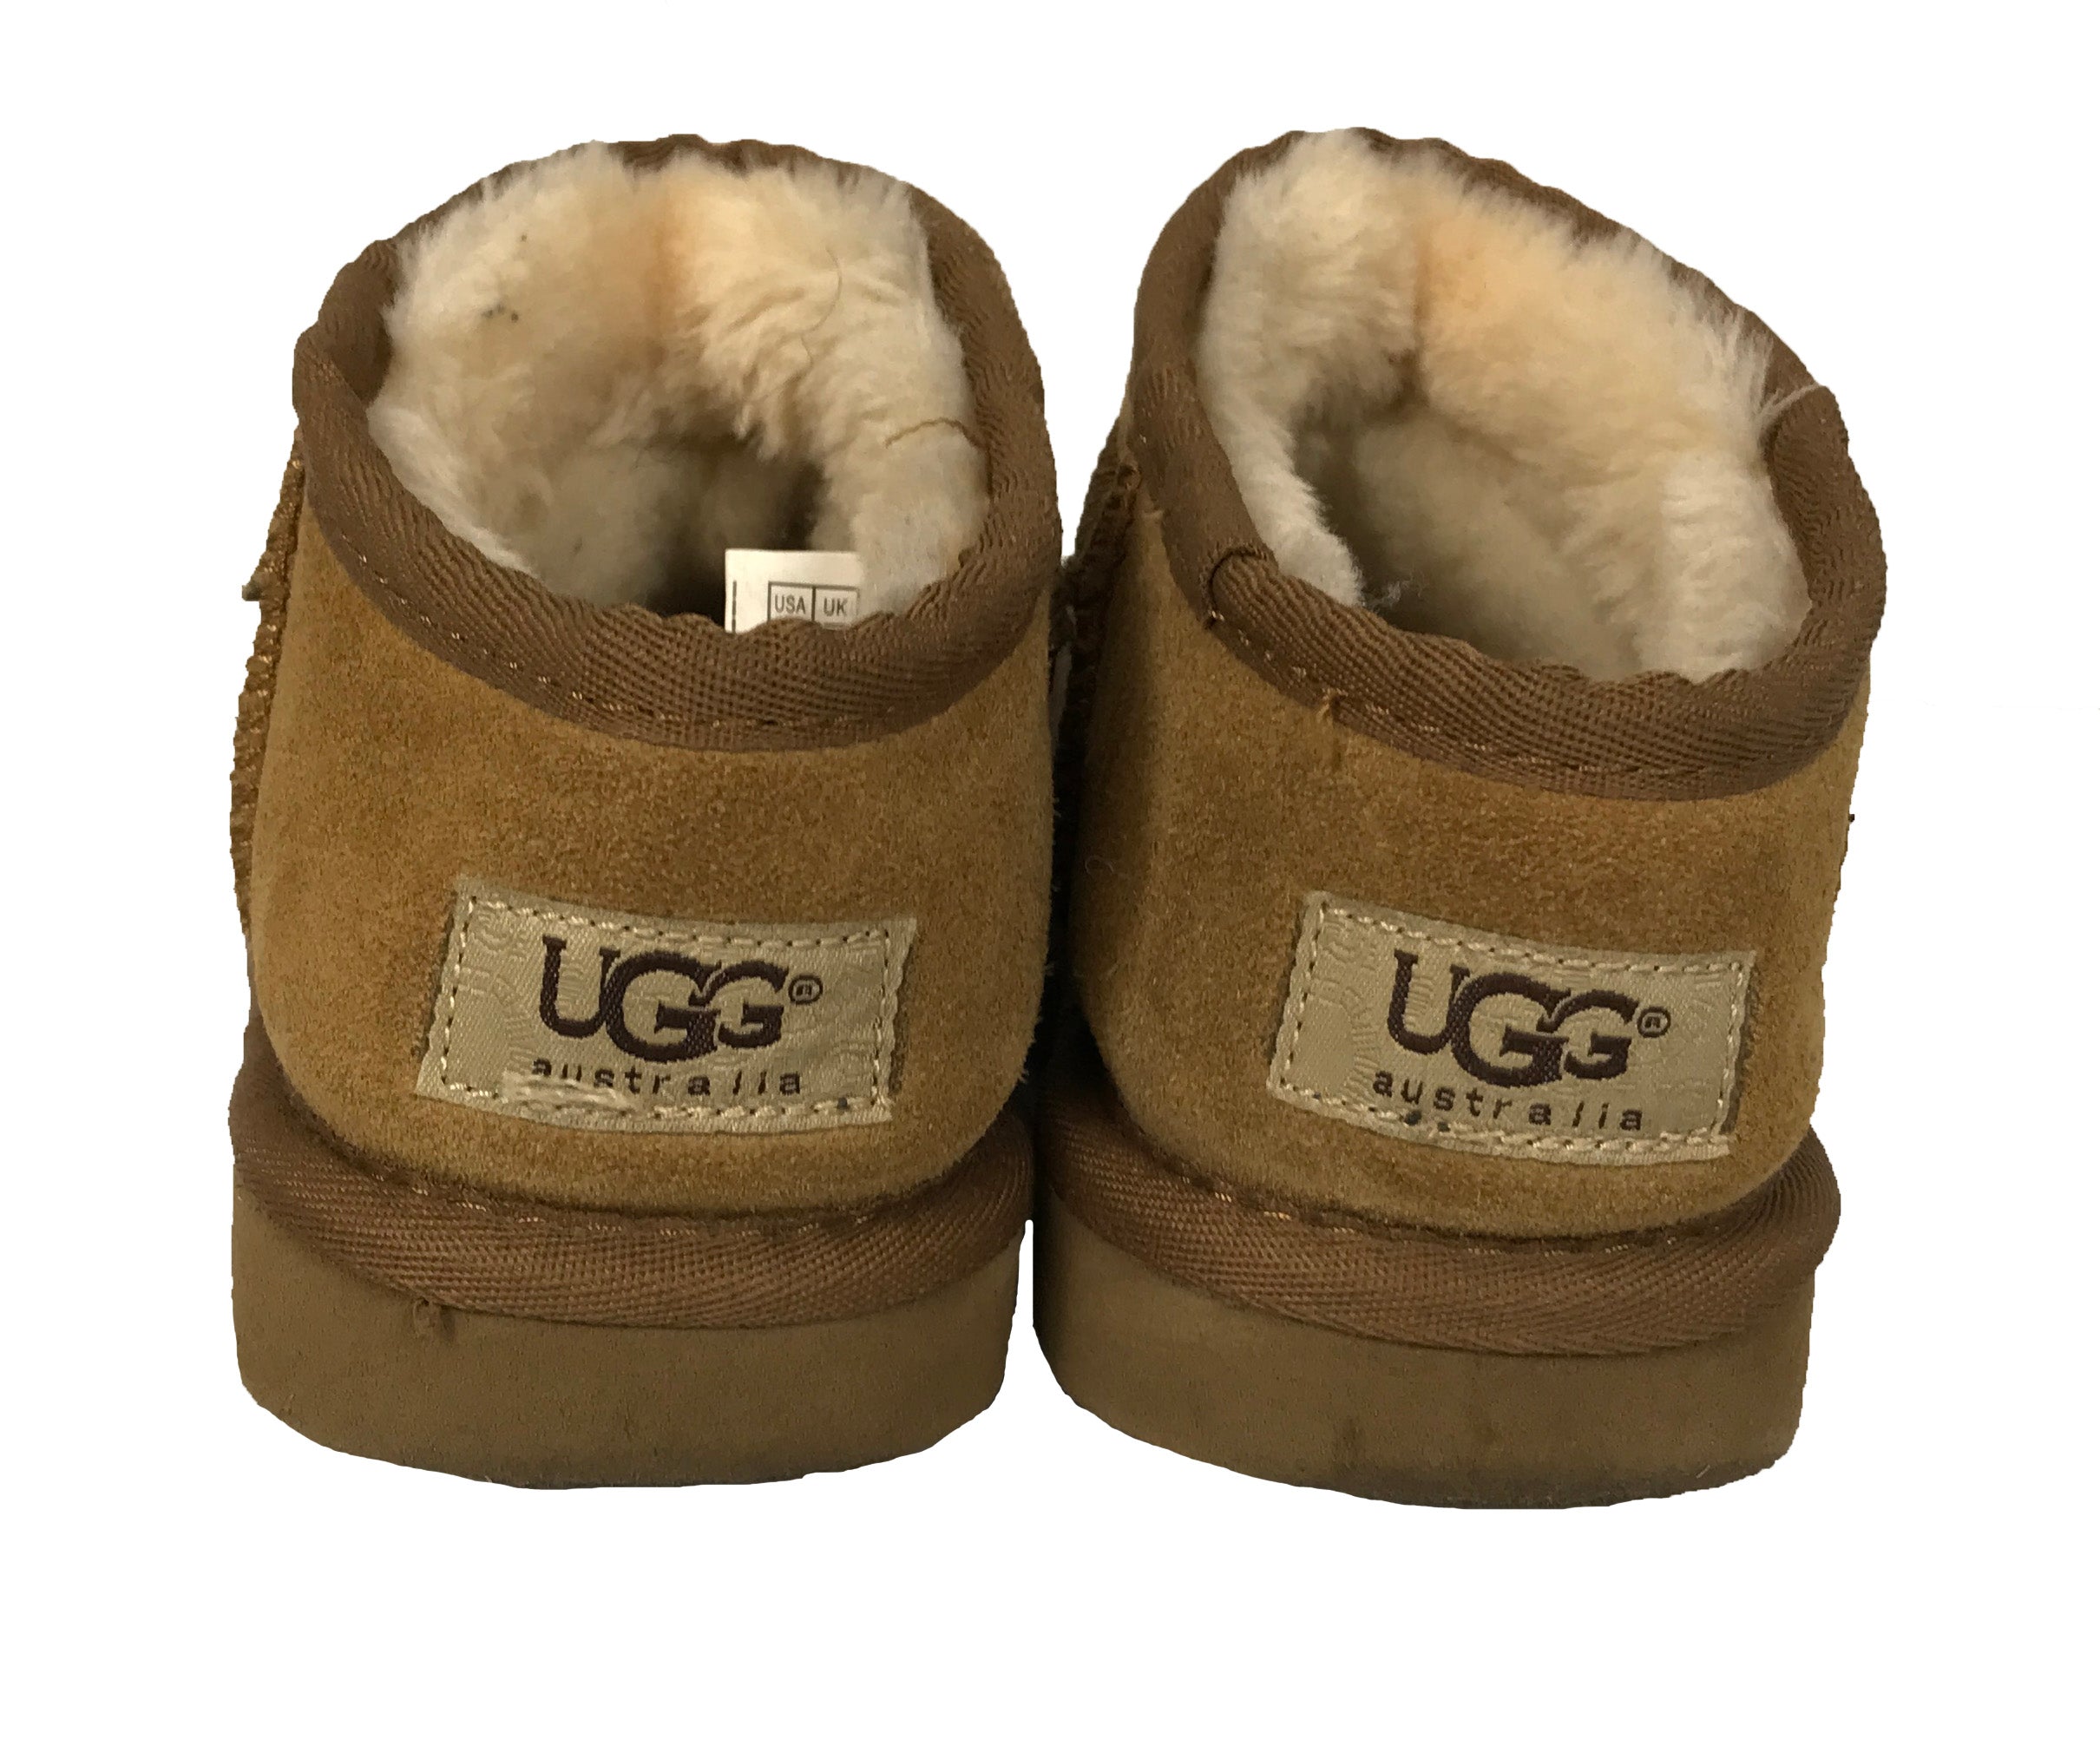 Ugg Classic Ultra Mini Brown Boots Women's Size 7